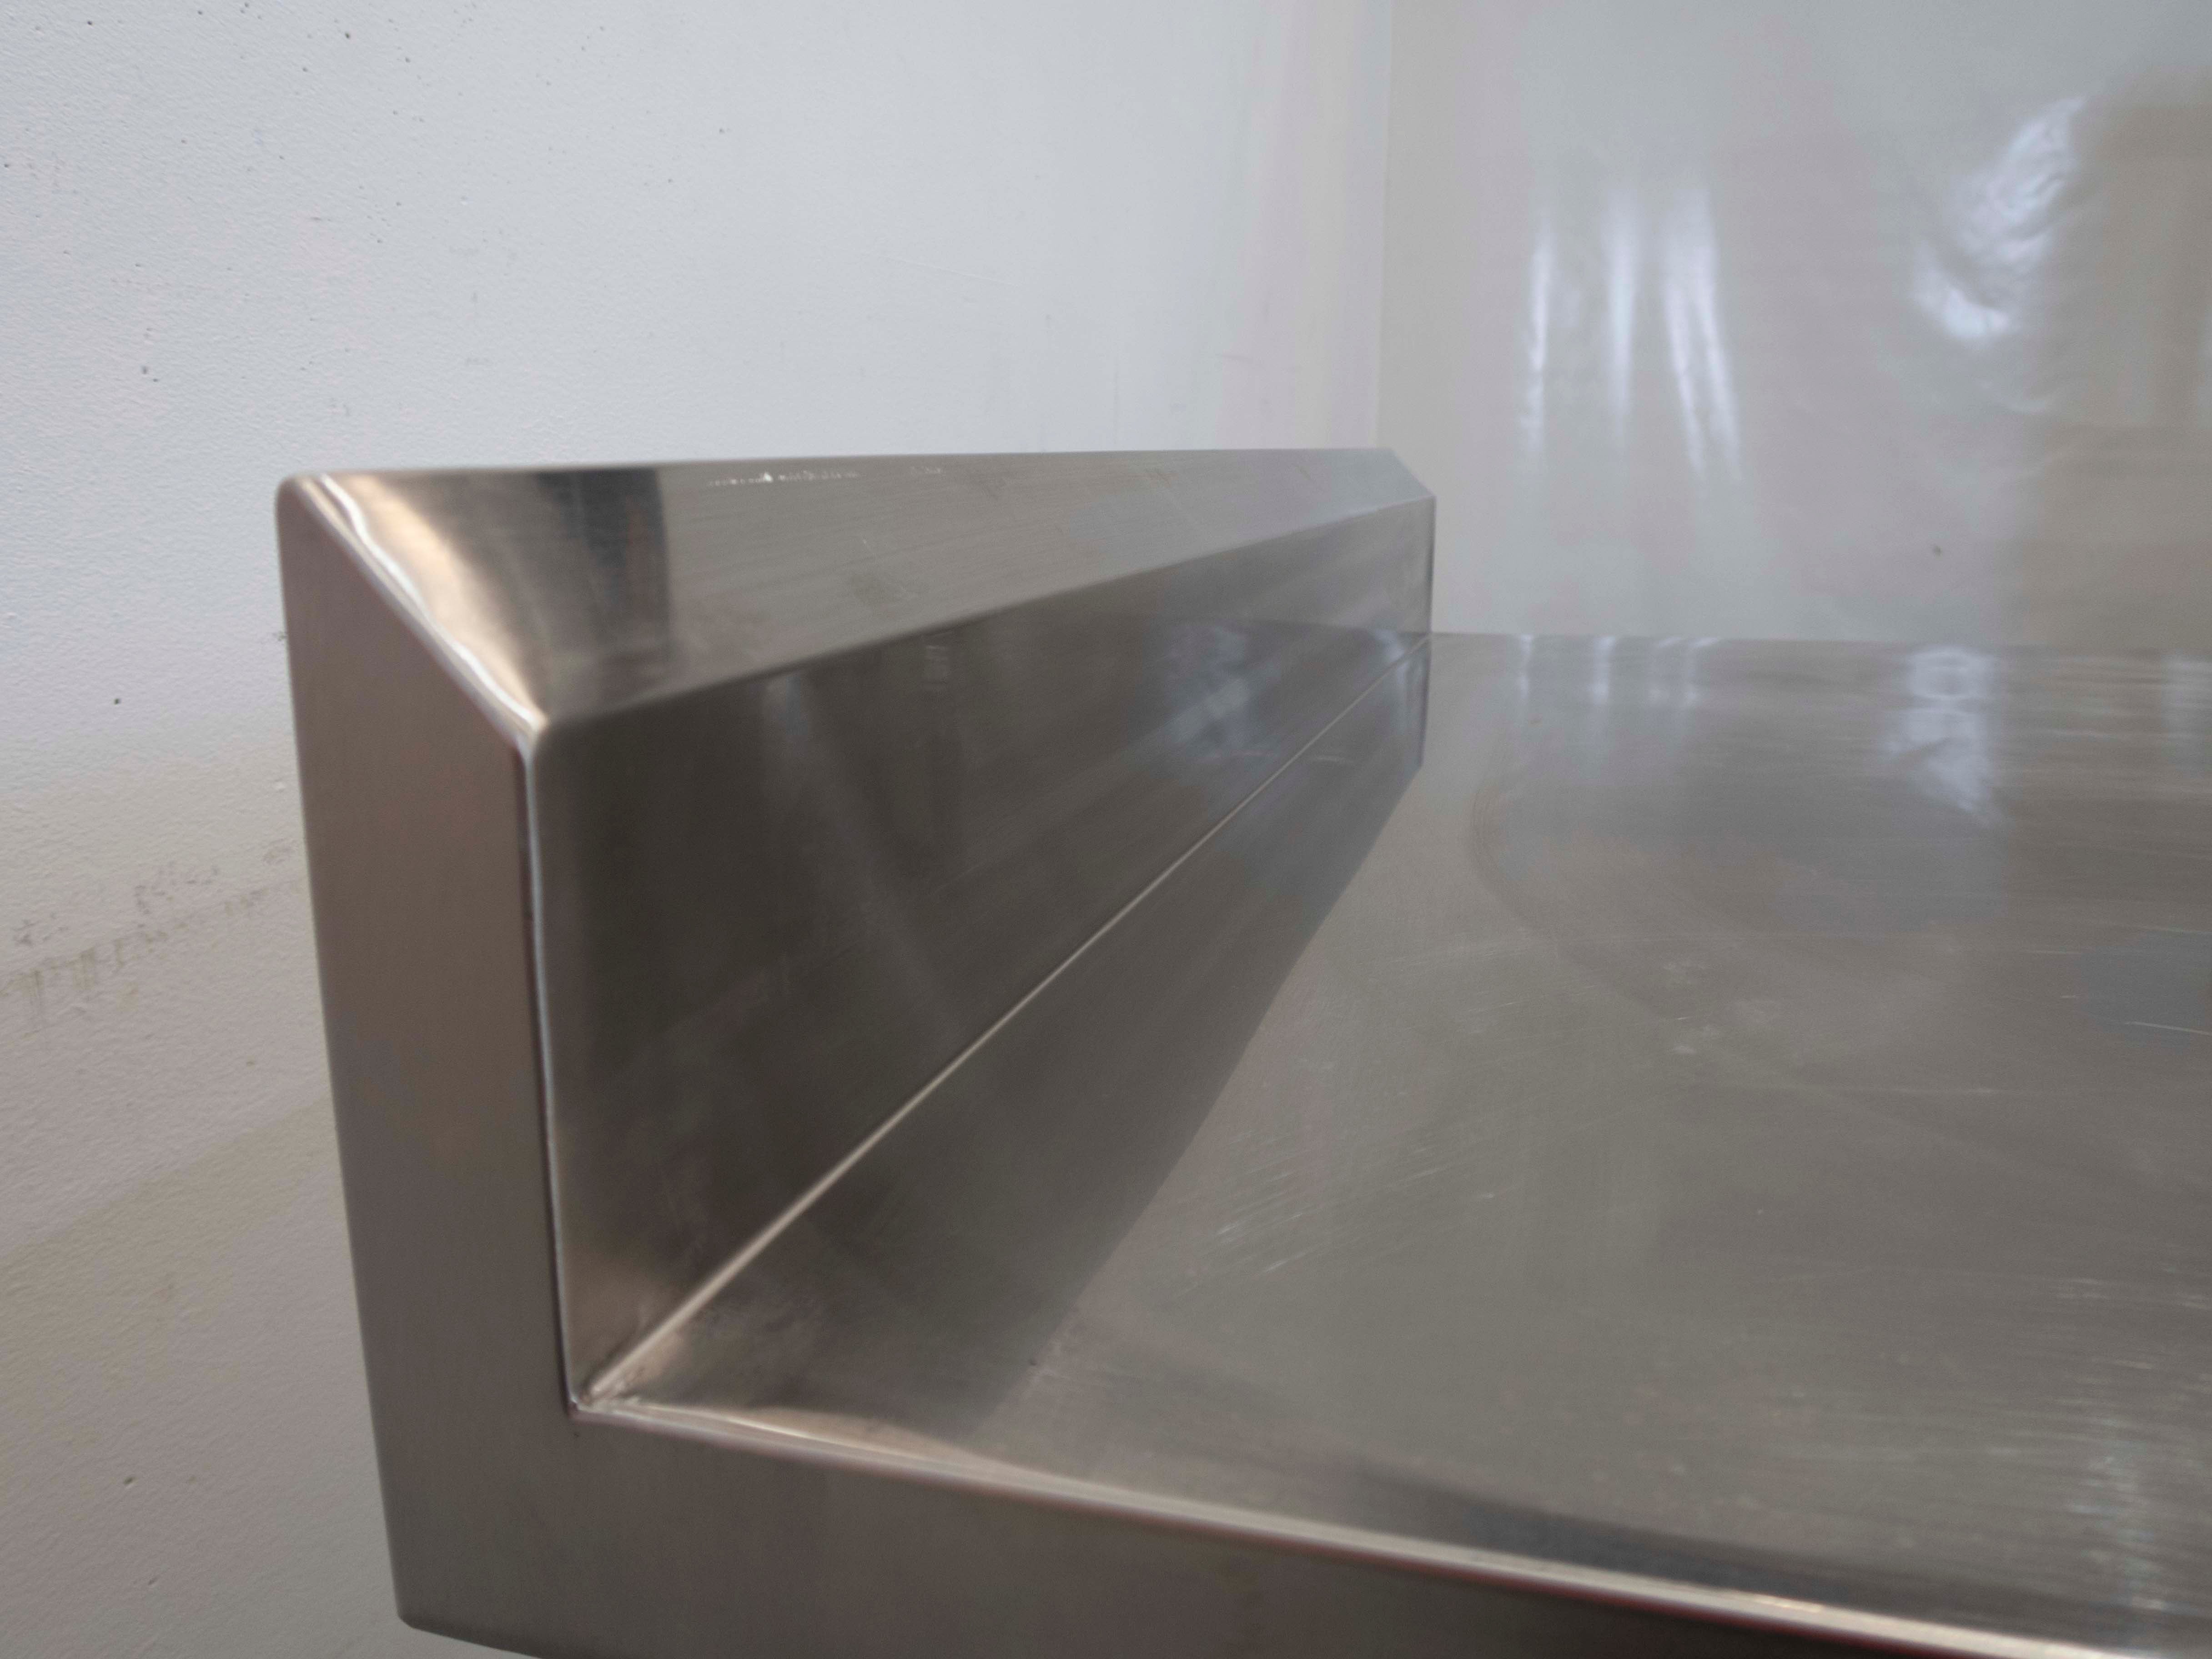 Thumbnail - Stainless Steel Bench with Splashback